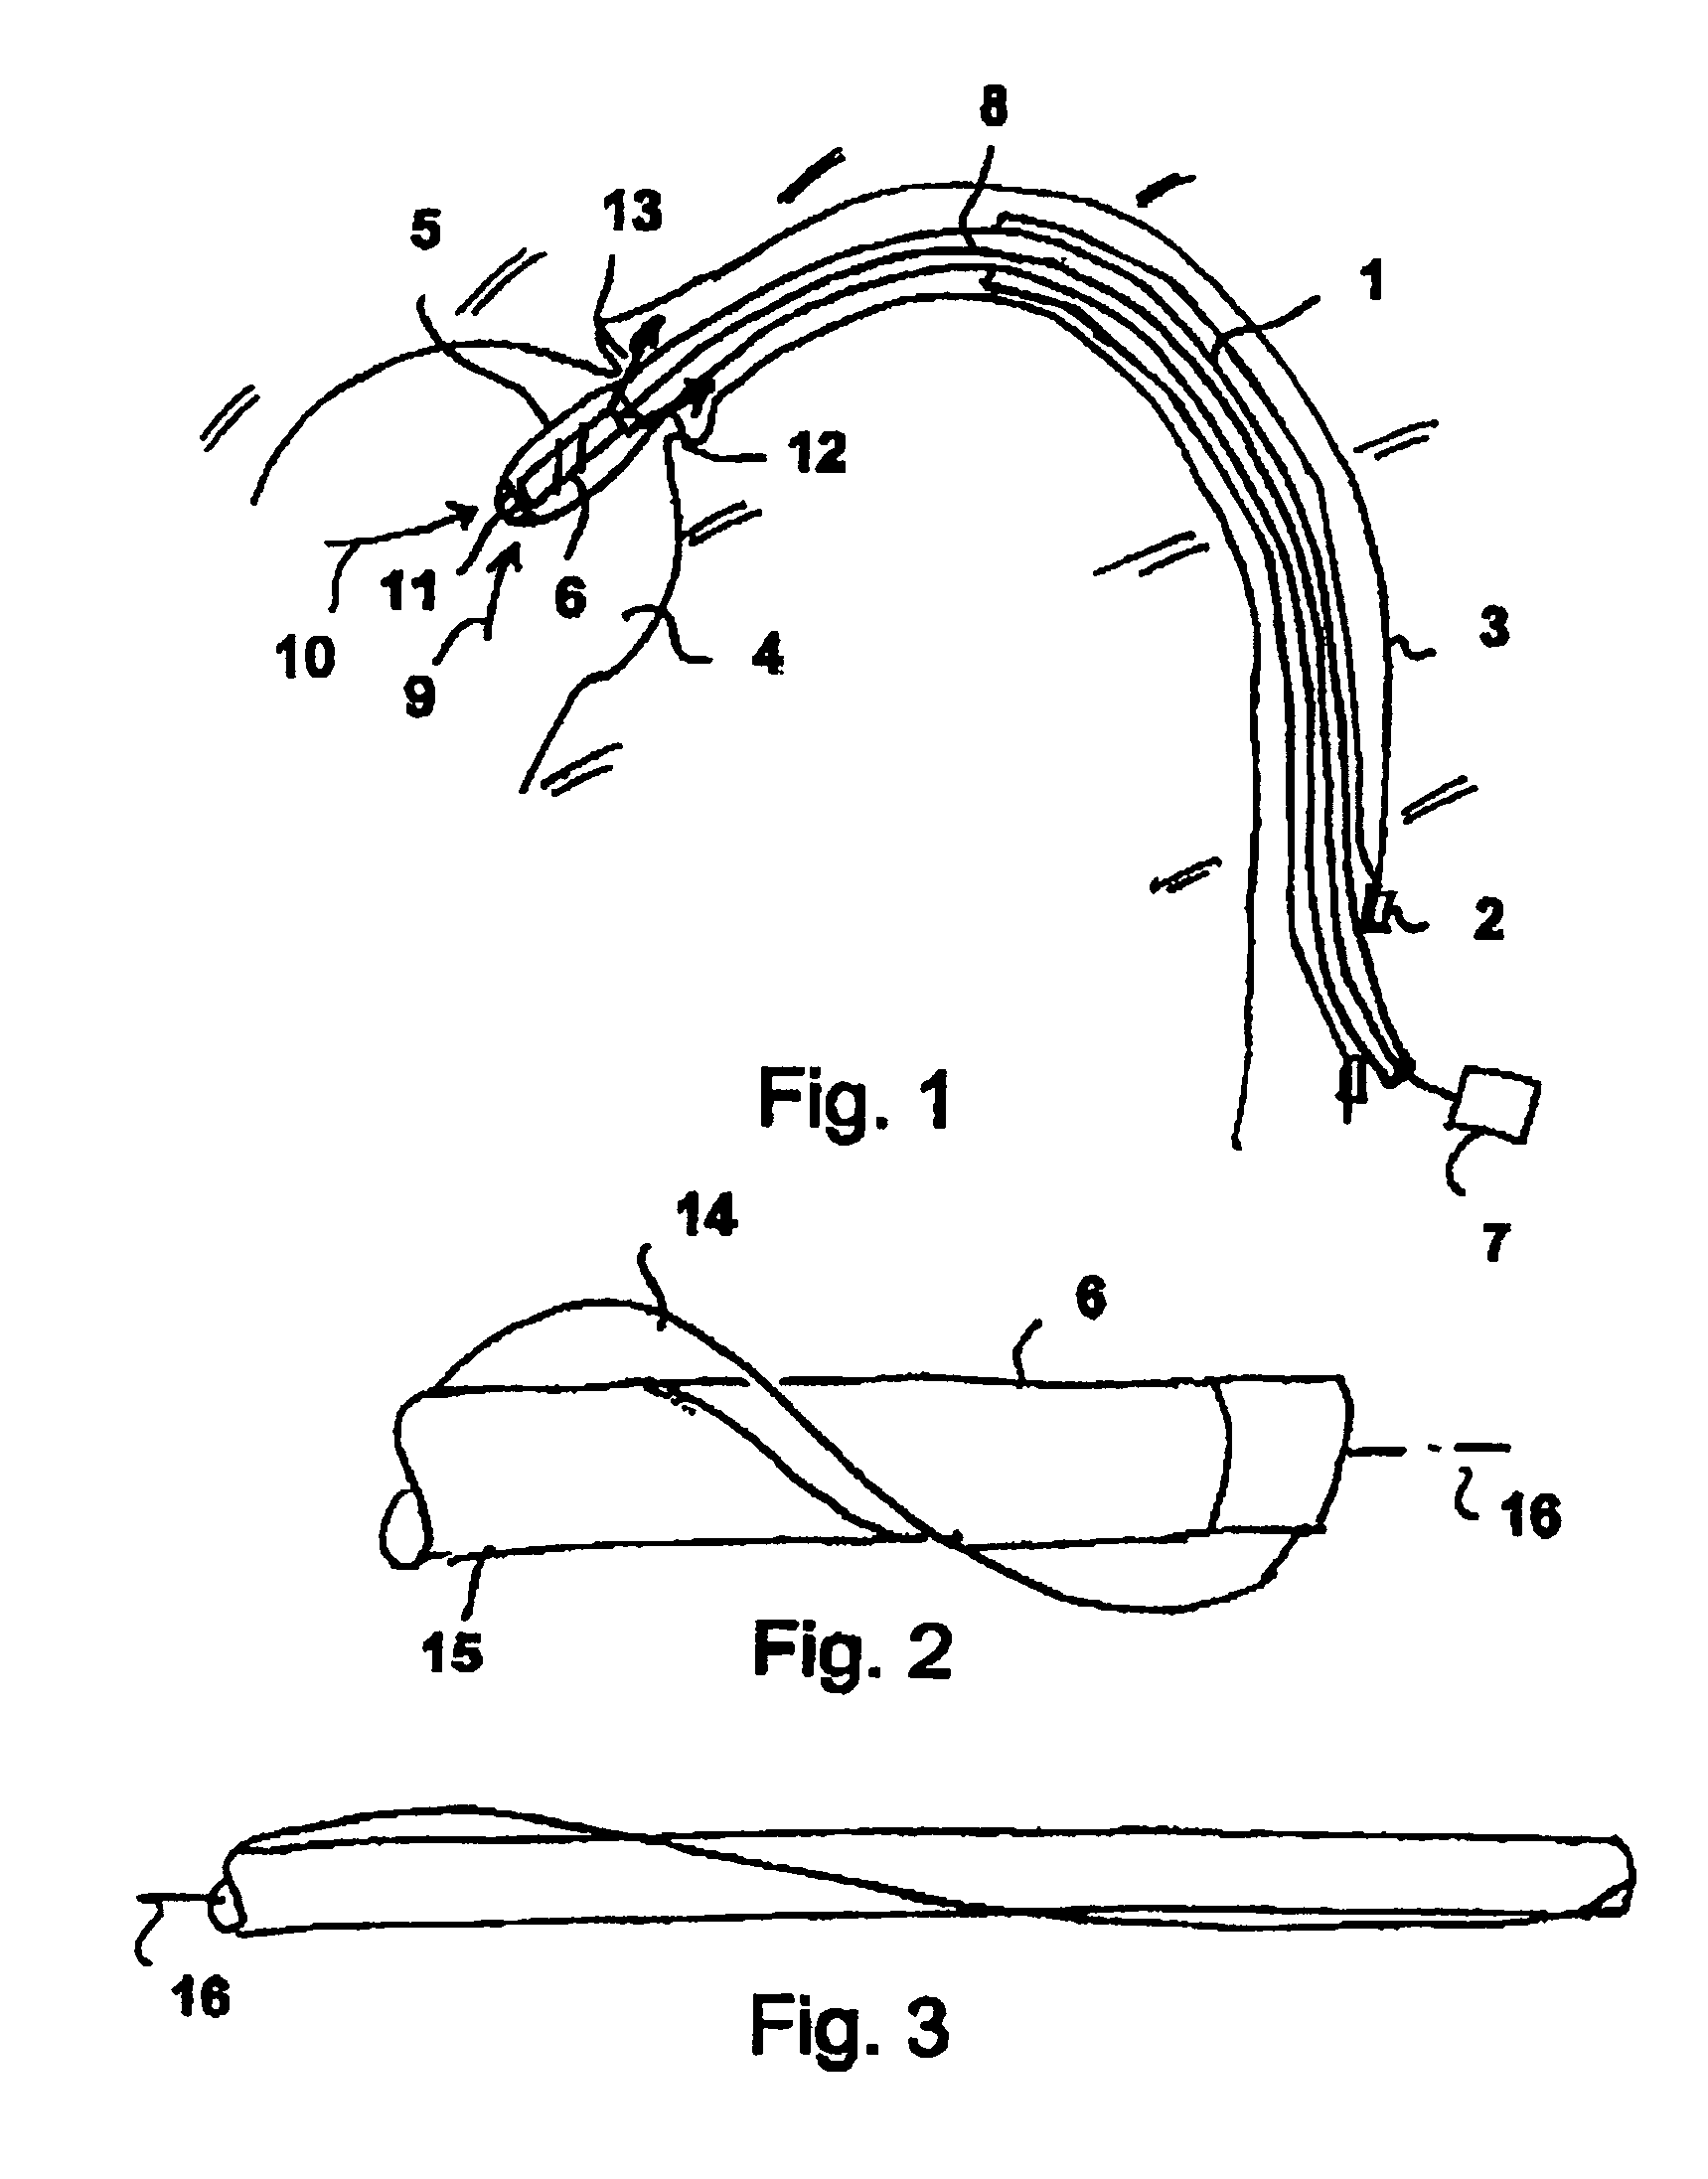 Fluid pump having a radially compressible rotor